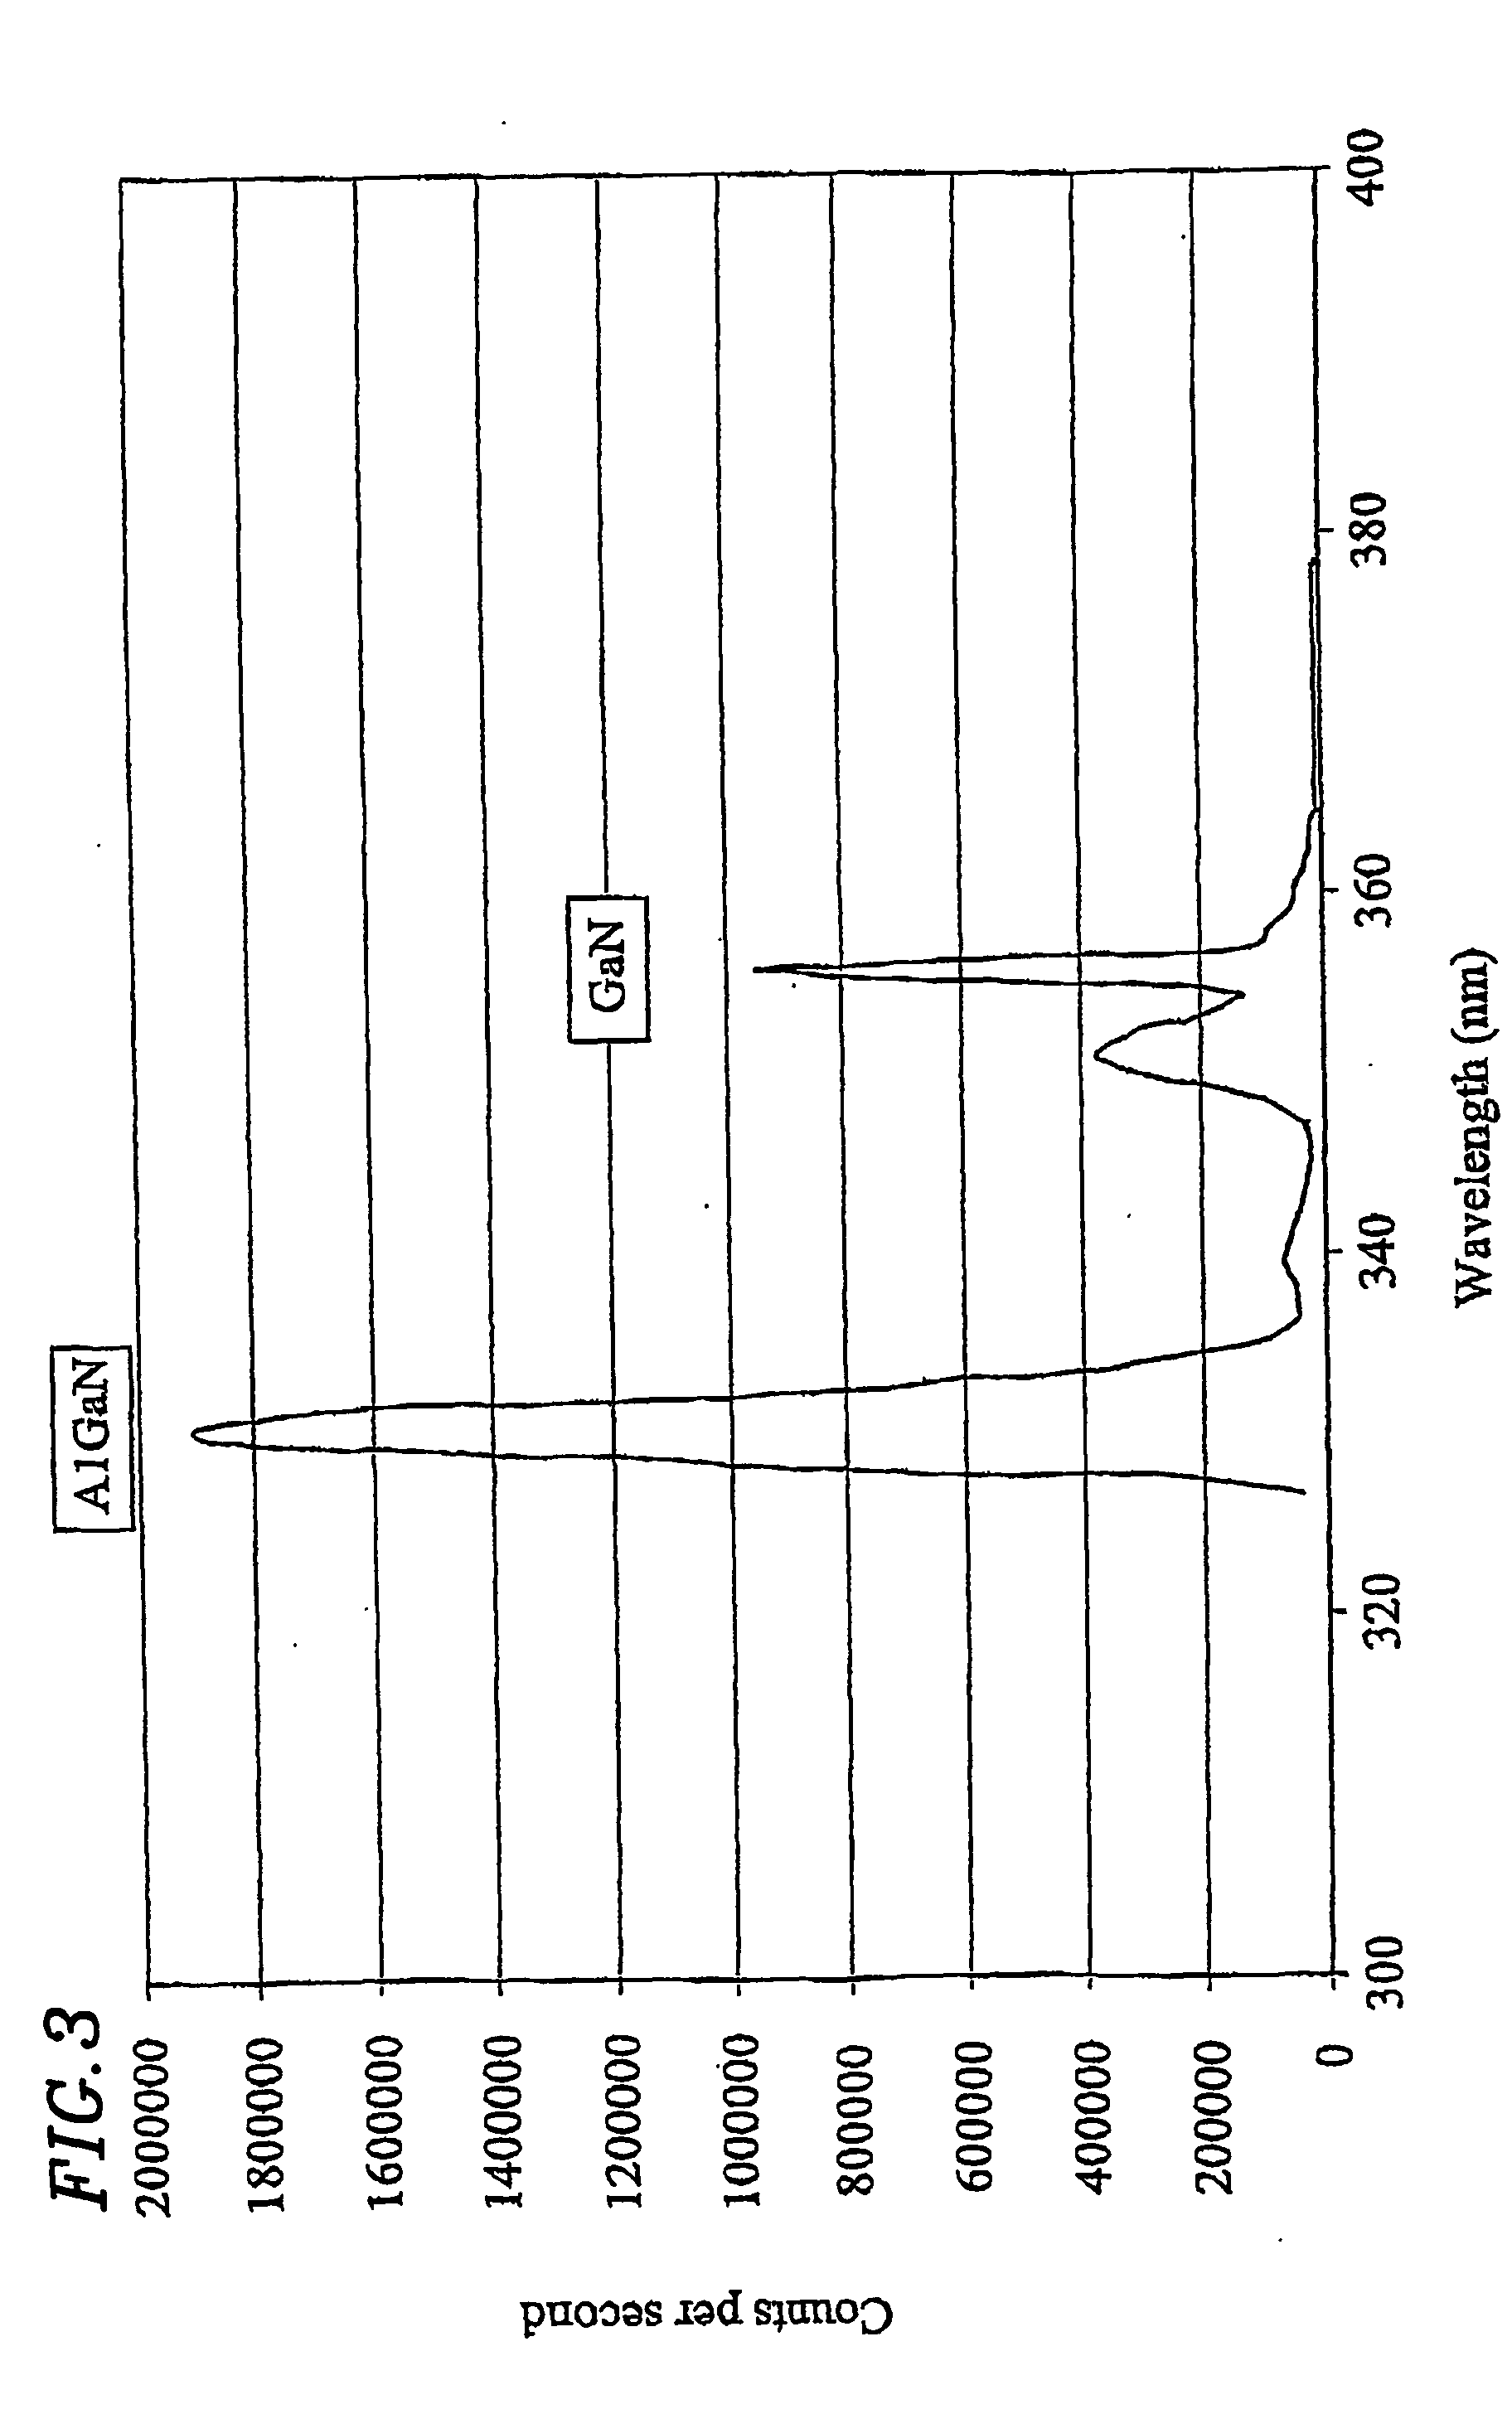 Mbe growth of an algan layer or algan multilayer structure